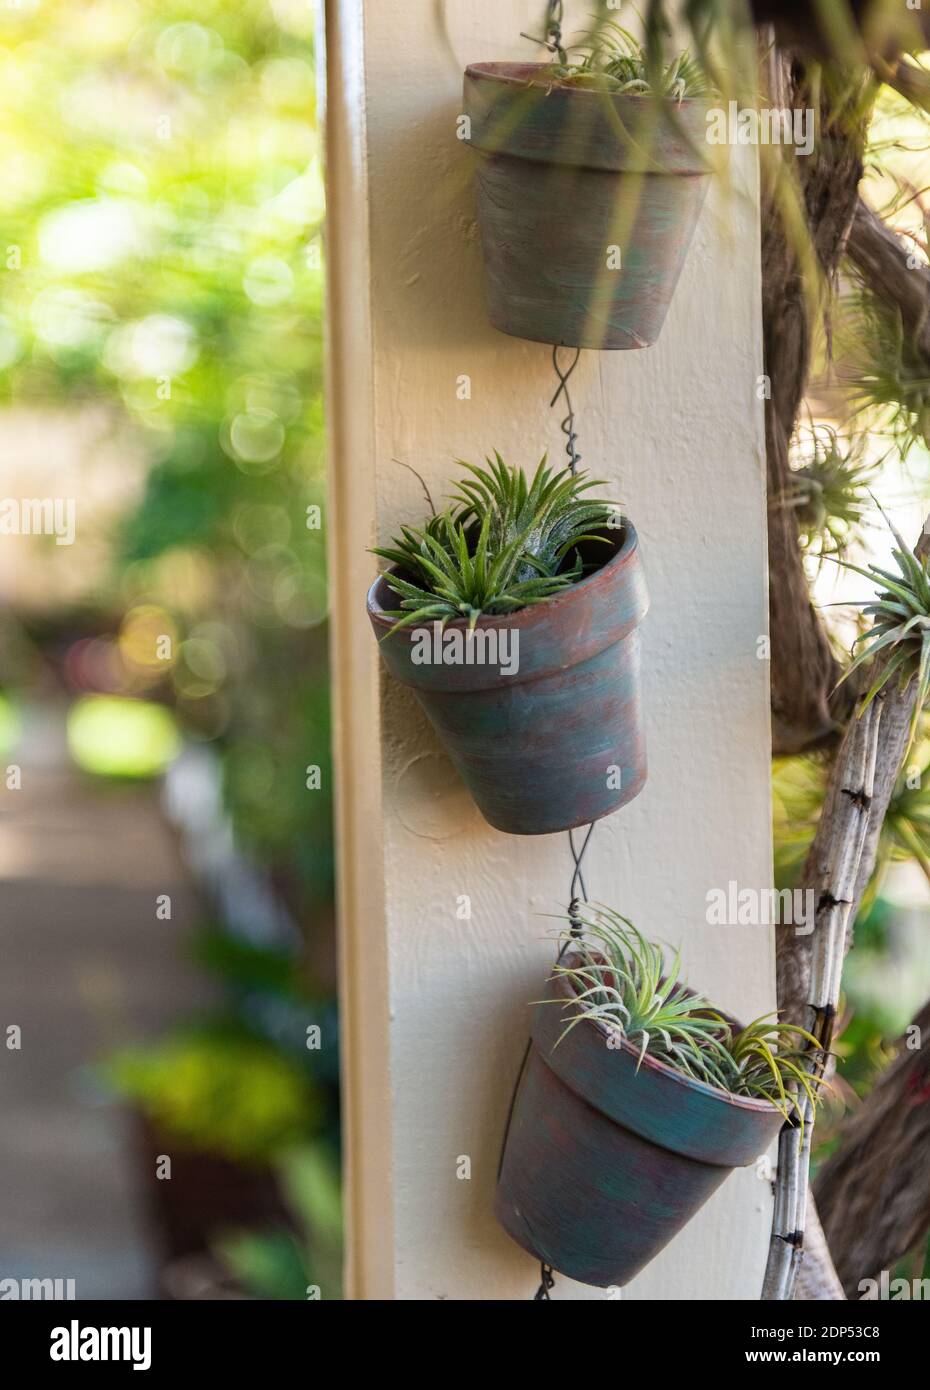 Potted Air Plants hanging on garden trellis post Stock Photo